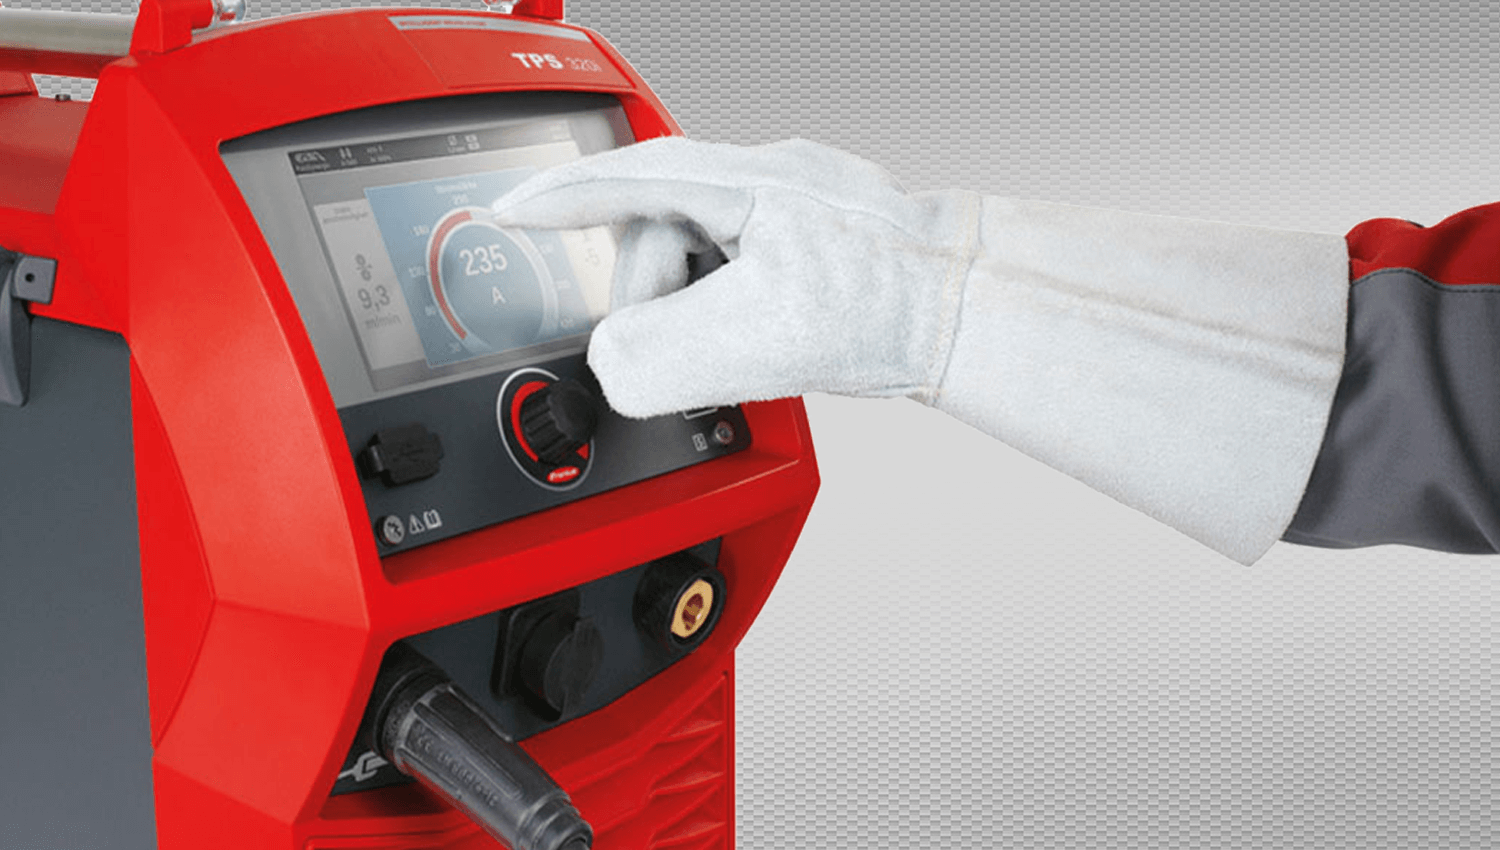 Fronius welding equipment supplied by PWP industries